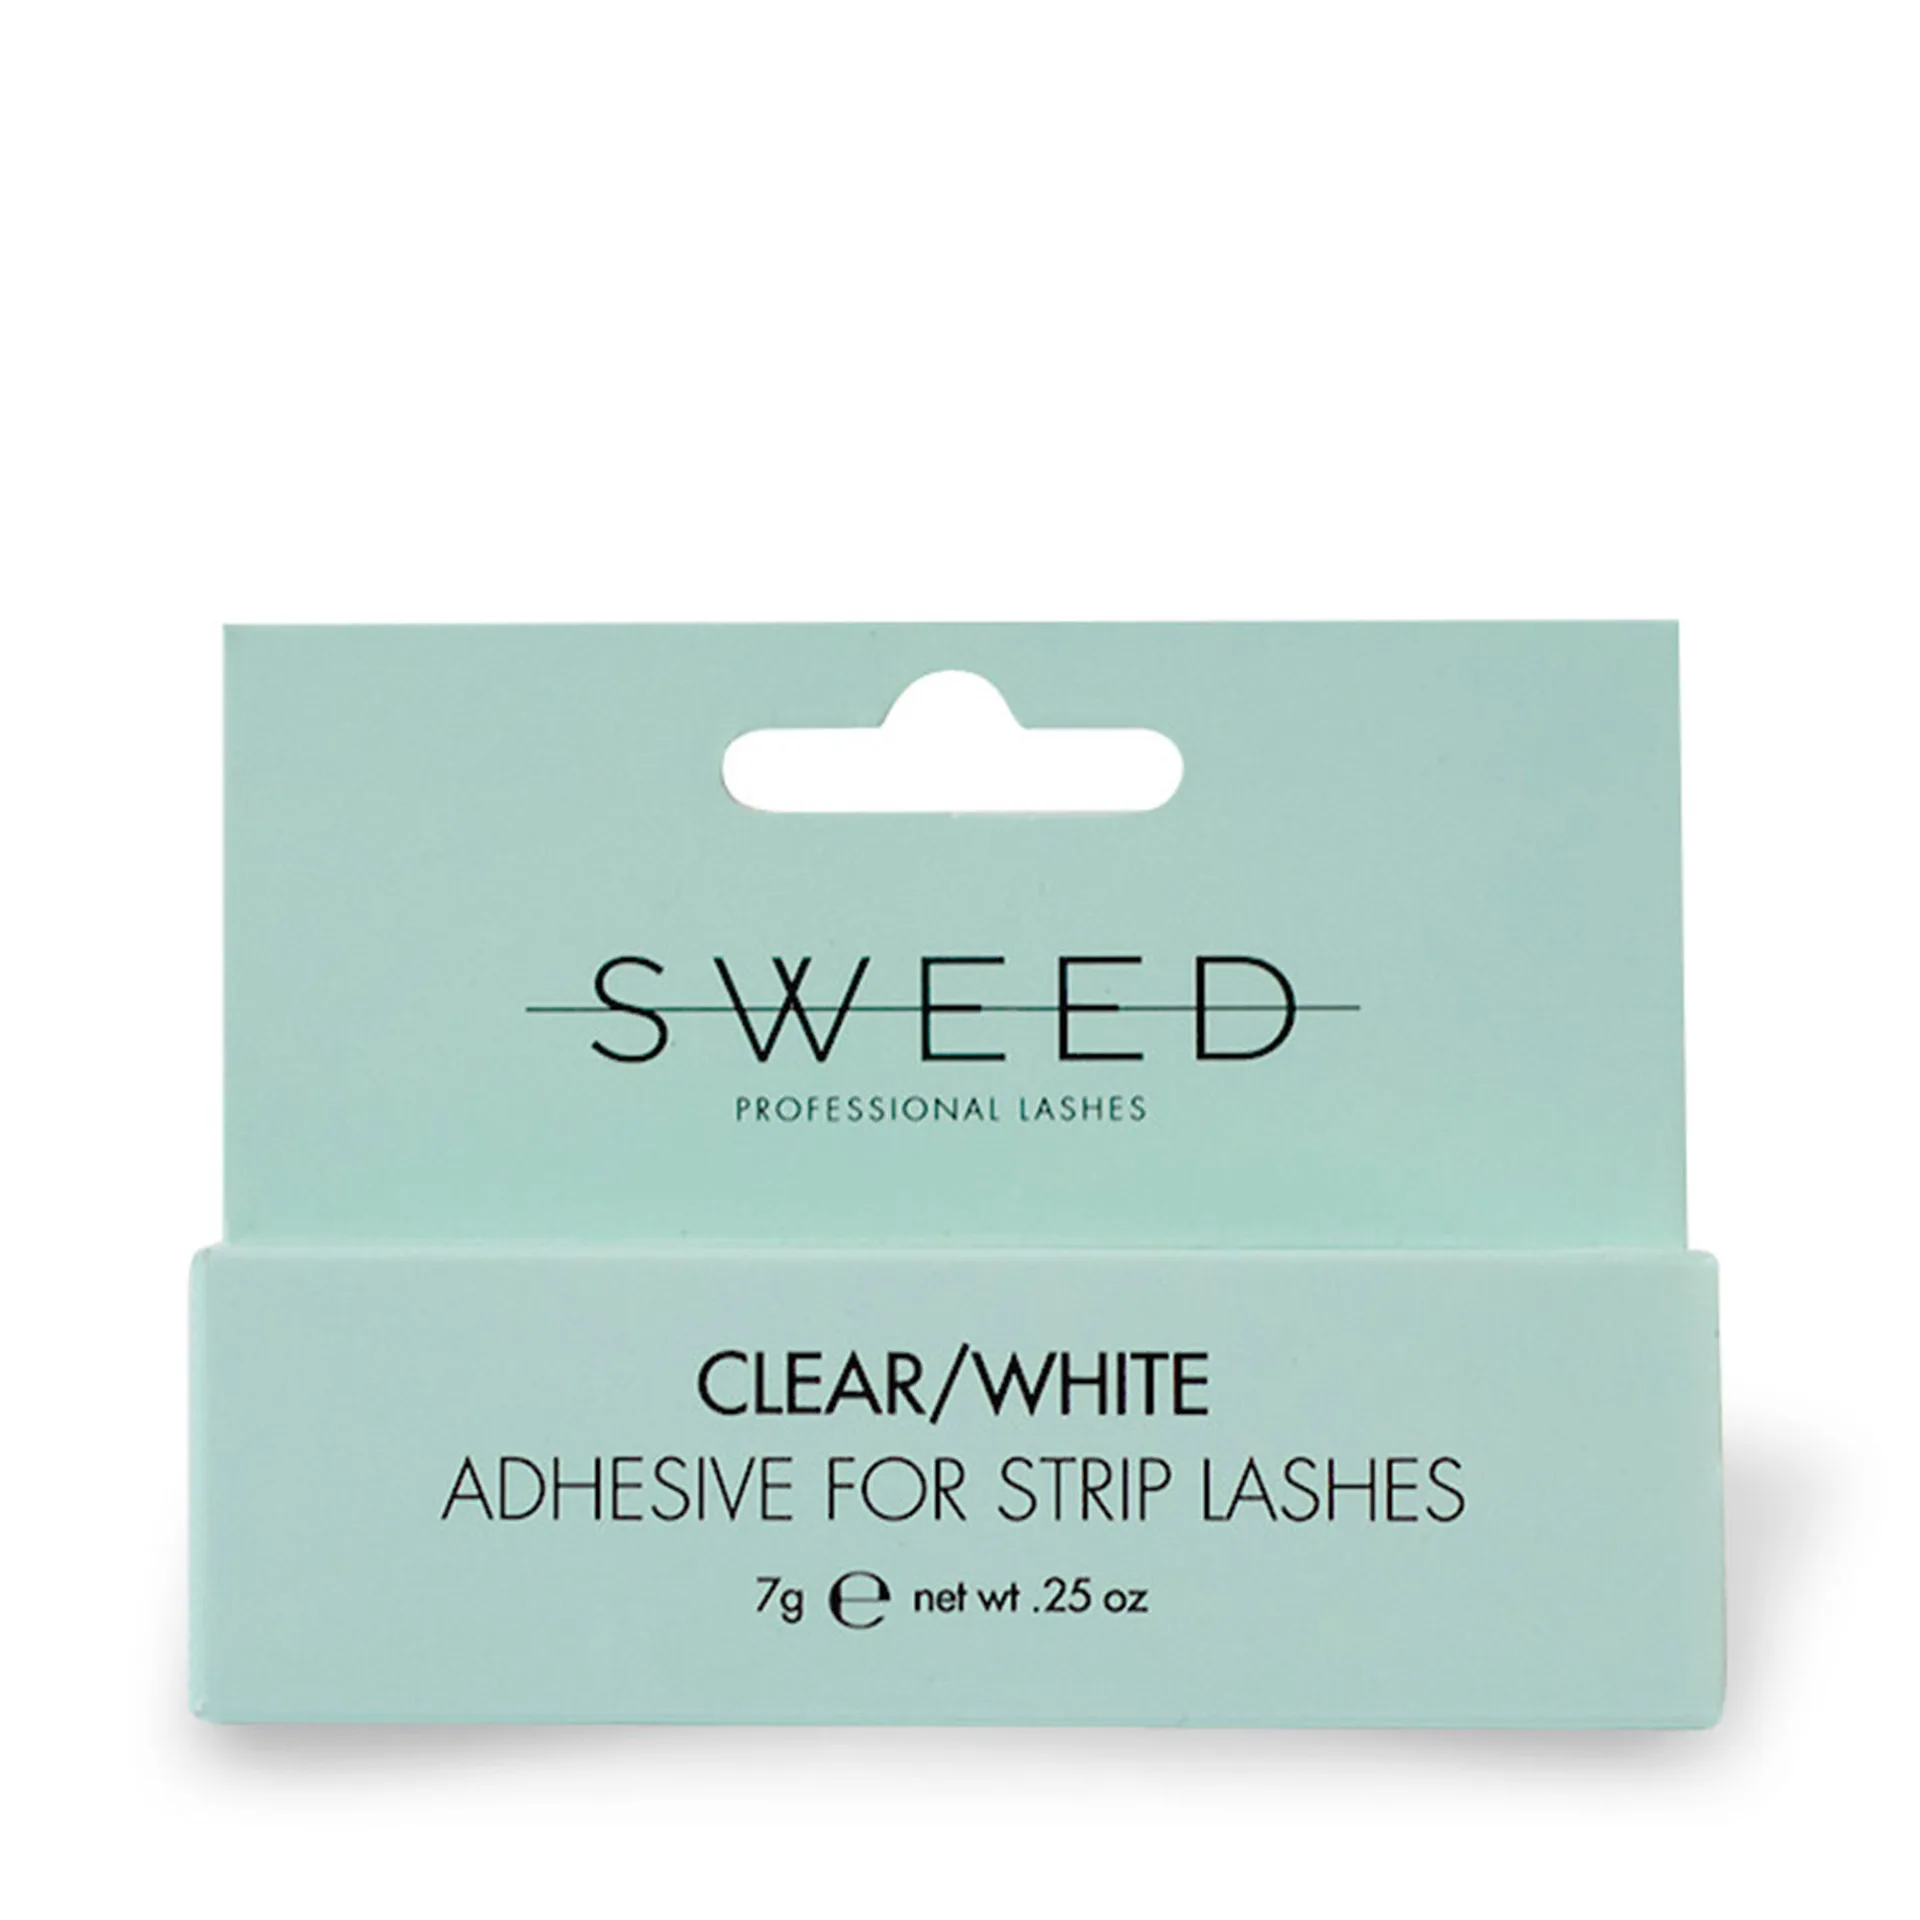 Clear/White Adhesive For Strip Lashes